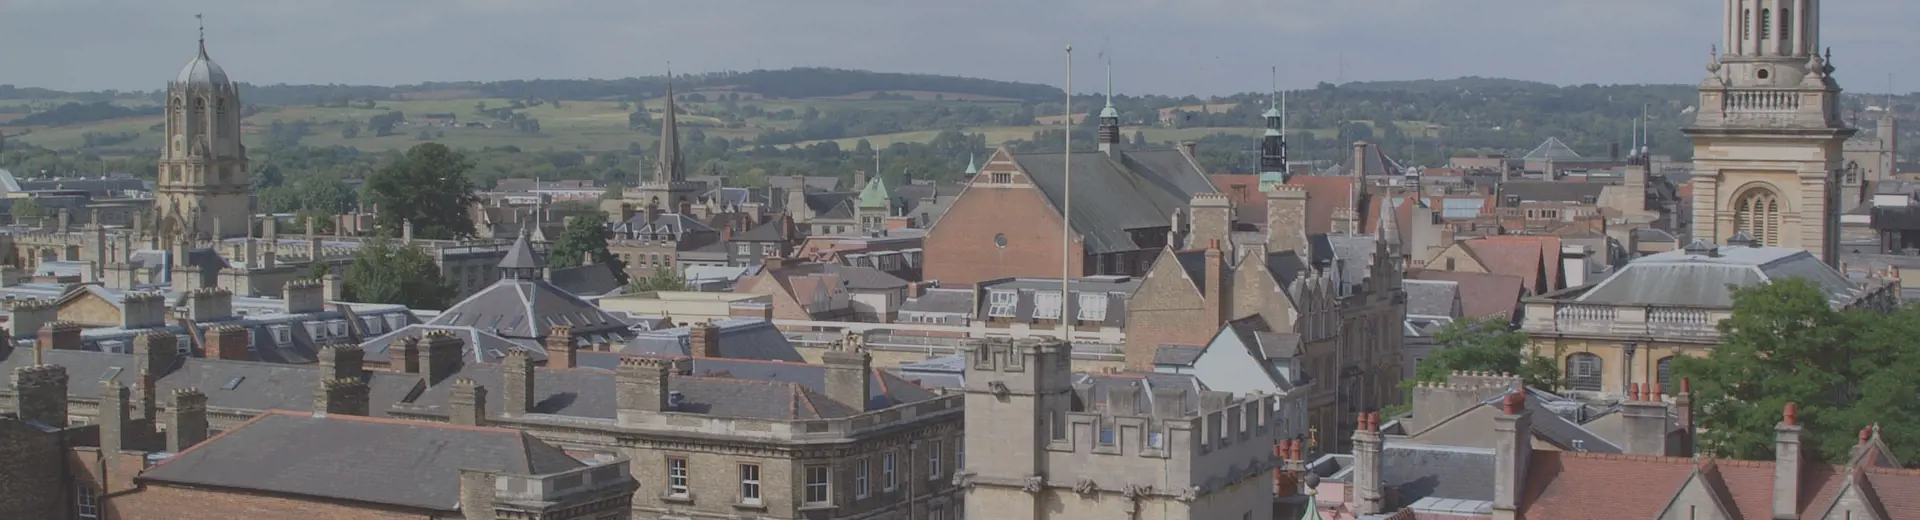 Oxford skyline and Oxfordshire countryside